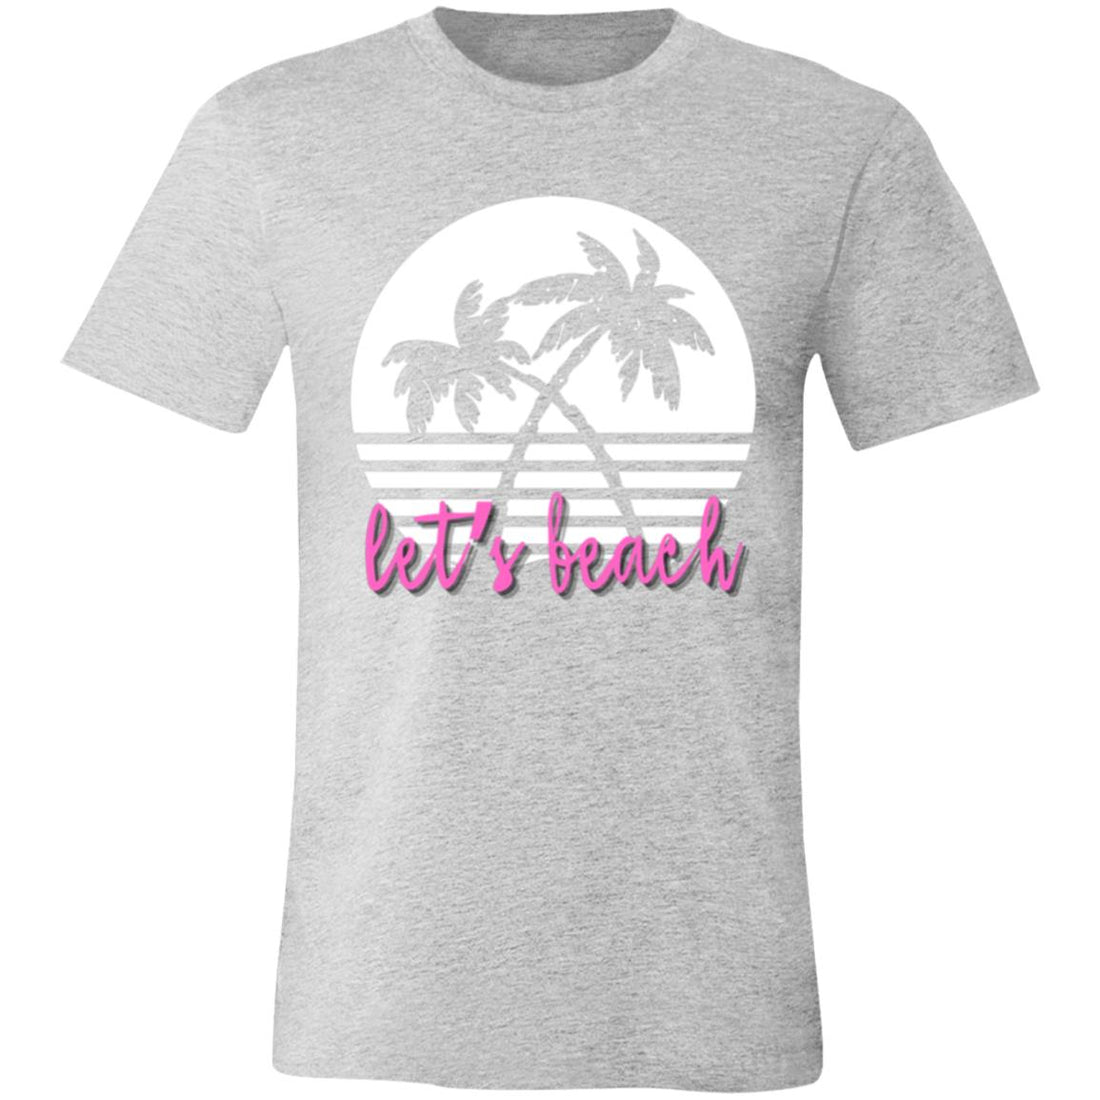 Let's Beach T-Shirt - T-Shirts - Positively Sassy - Let's Beach T-Shirt